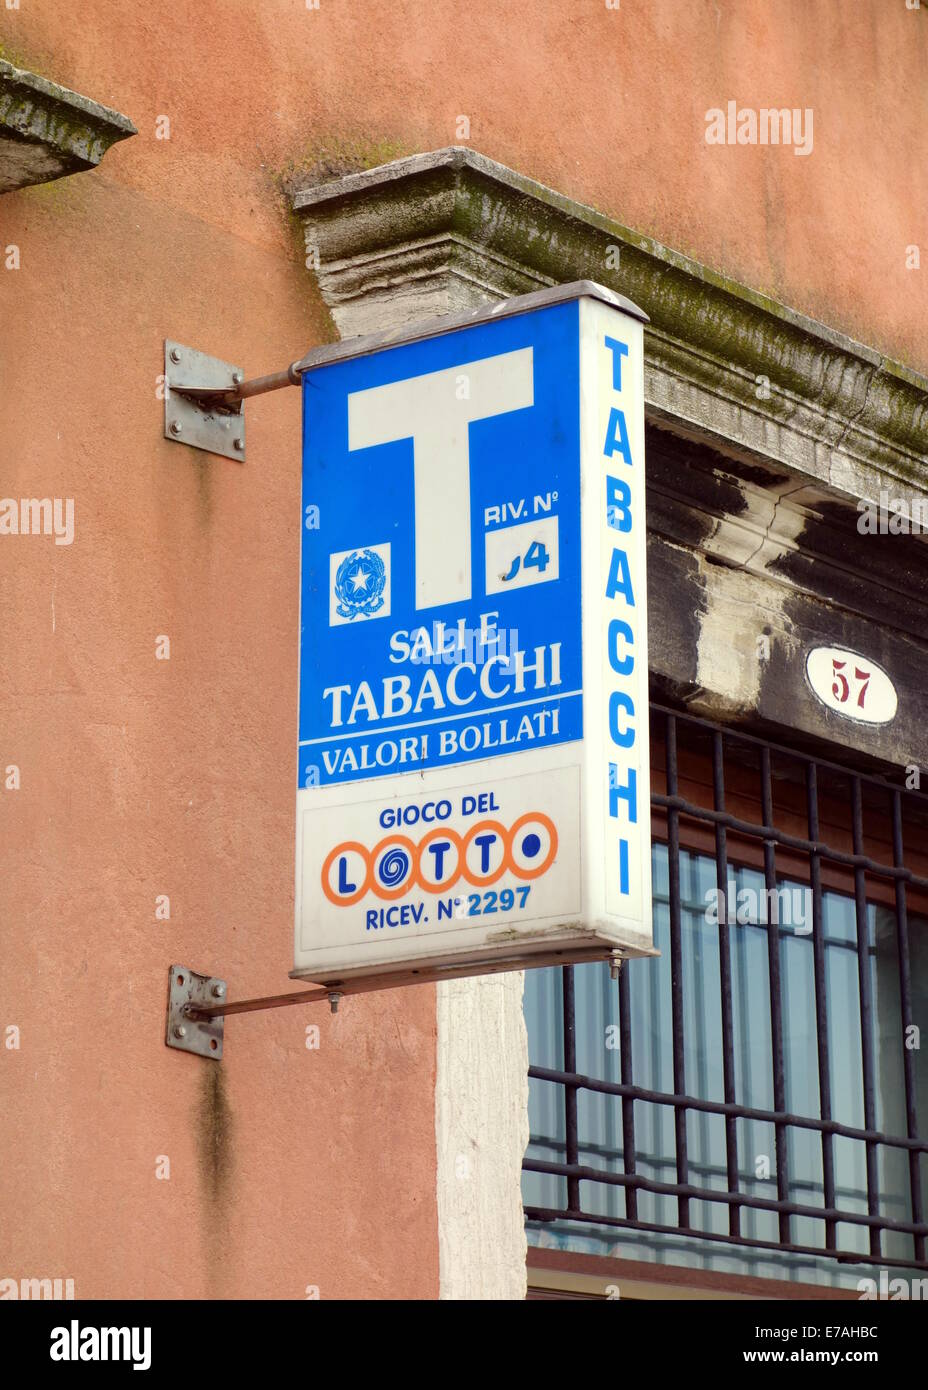 Tobacco shop sign in Italy Stock Photo